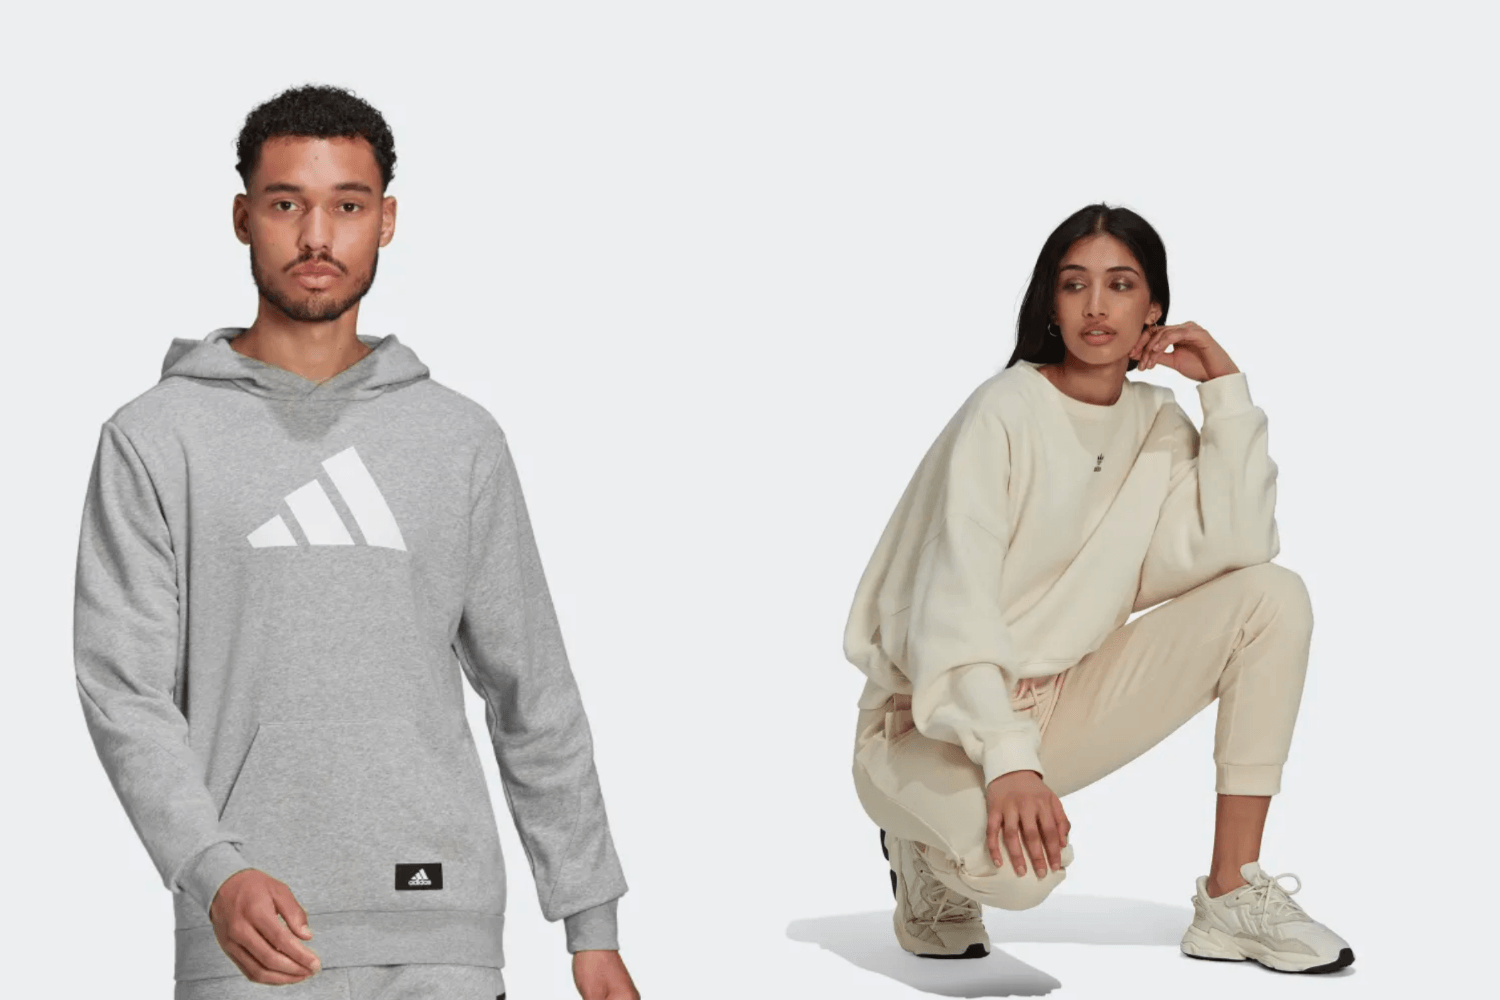 The Mid Season Sale at adidas has started